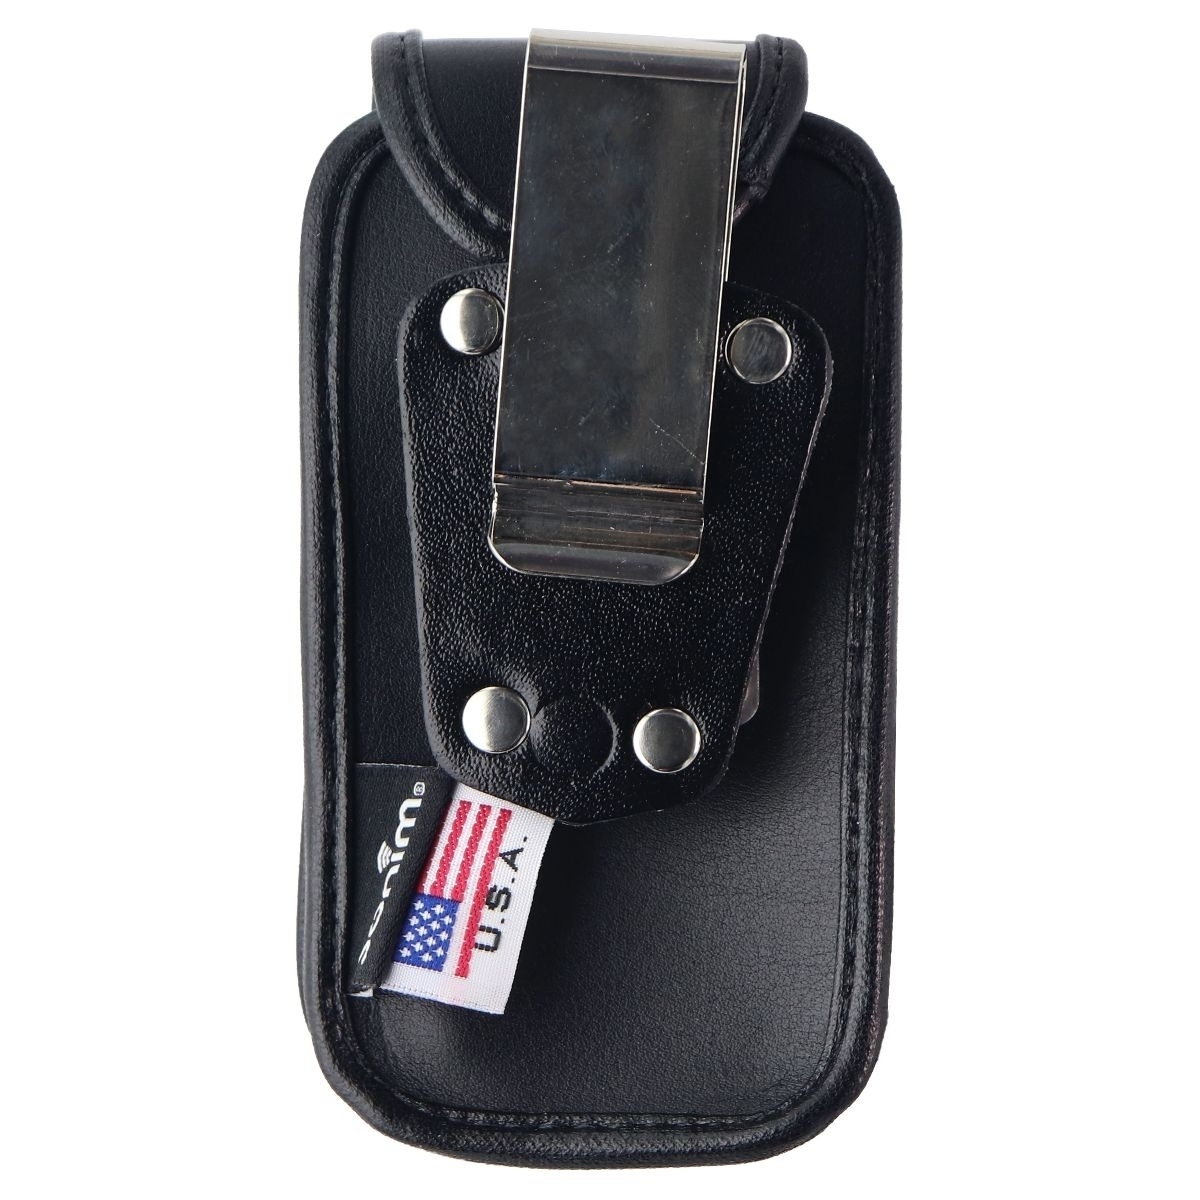 Sonim Leather Fitted Case With Metal Clip For Sonim XP3 - Black